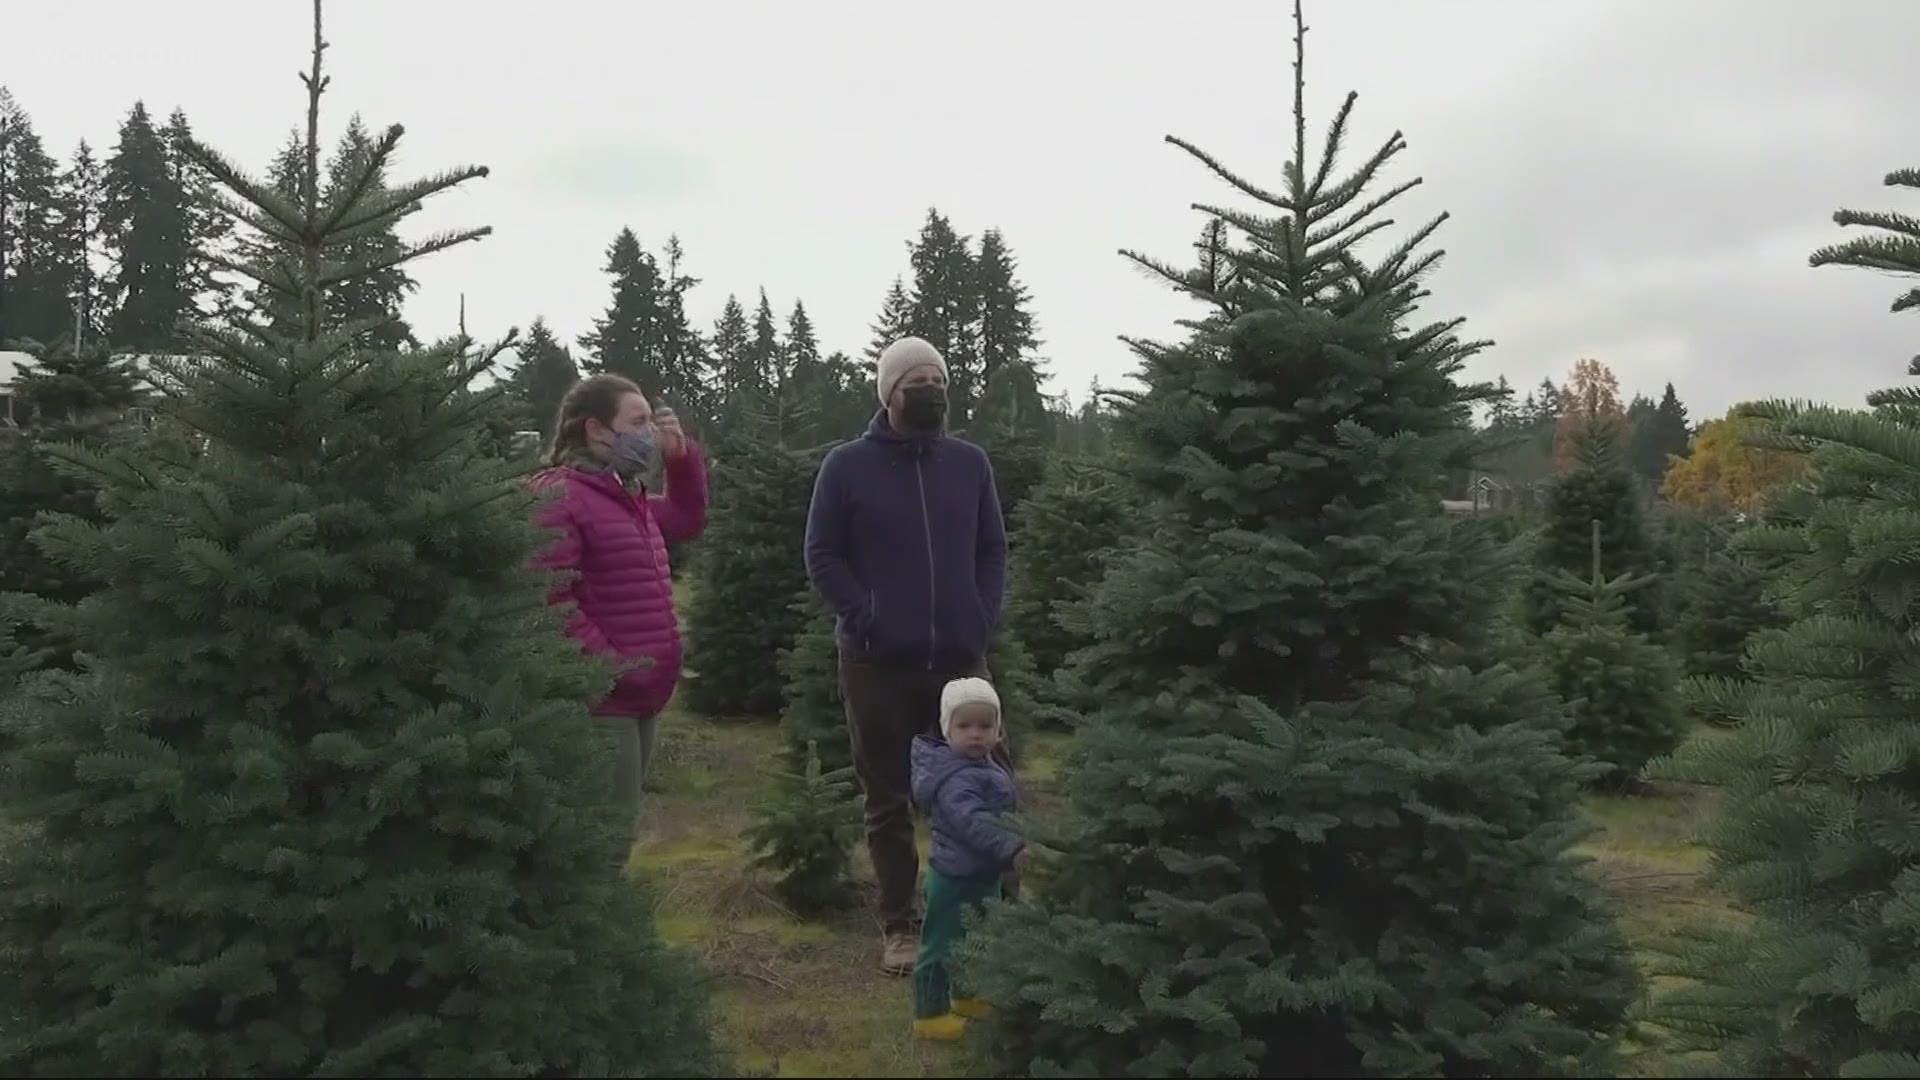 With Thanksgiving now behind us, many are turning their sights toward Christmas. It's good news for North Carolina, one of the top tree exporting states nationwide.